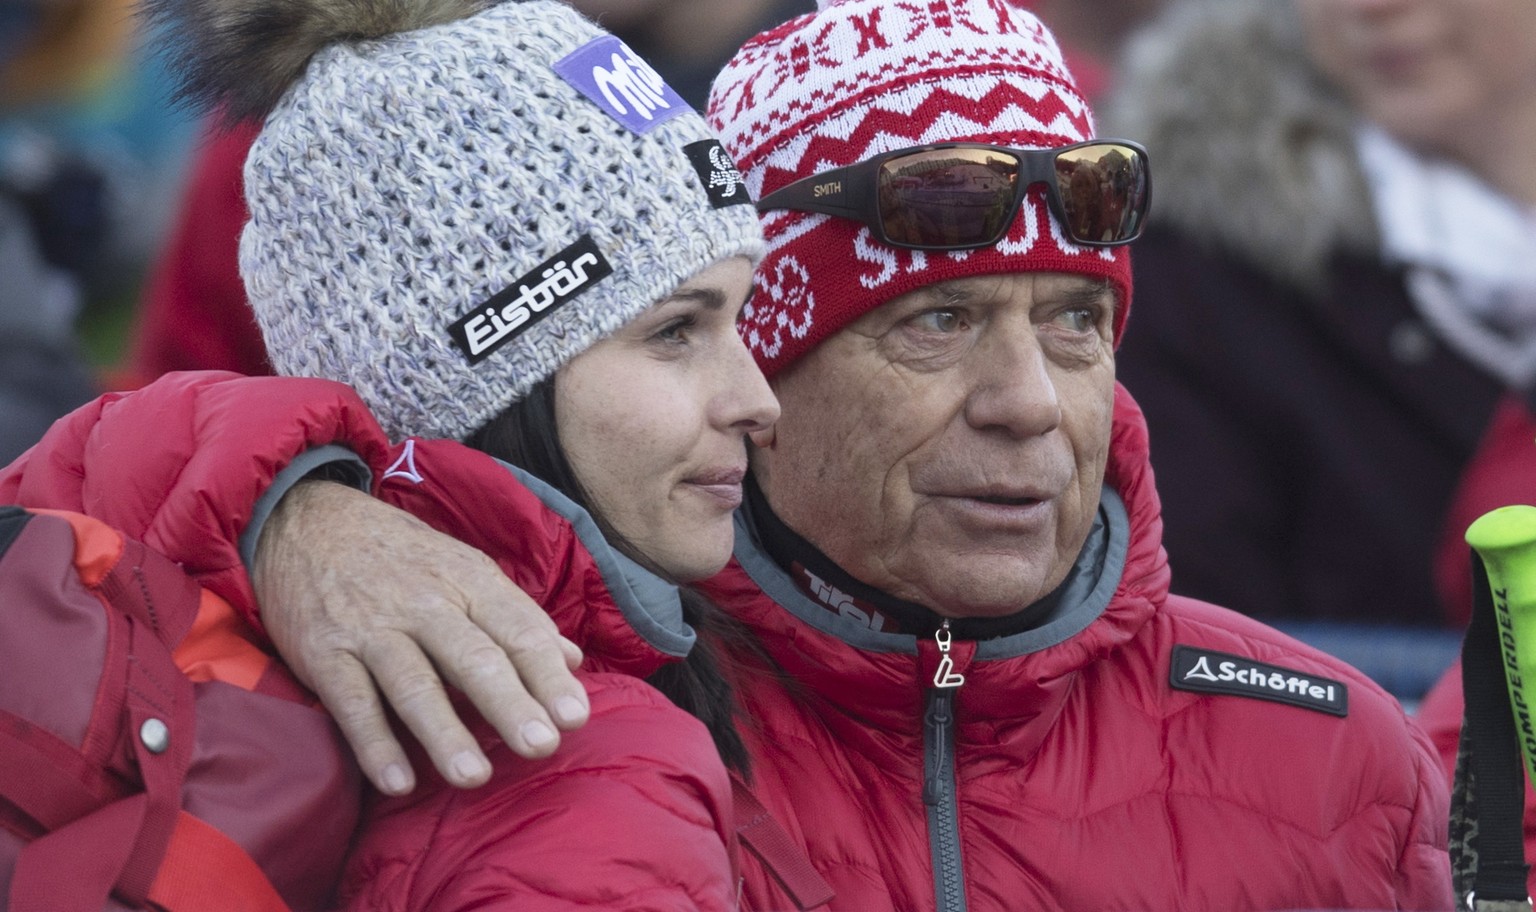 epa08092788 President of the Austrian Ski Federation Peter Schroecksnadel (R) hugs Austrian ski racer Anna Veith during the Women&#039;s Giant Slalom race at the FIS Alpine Skiing World Cup event in L ...